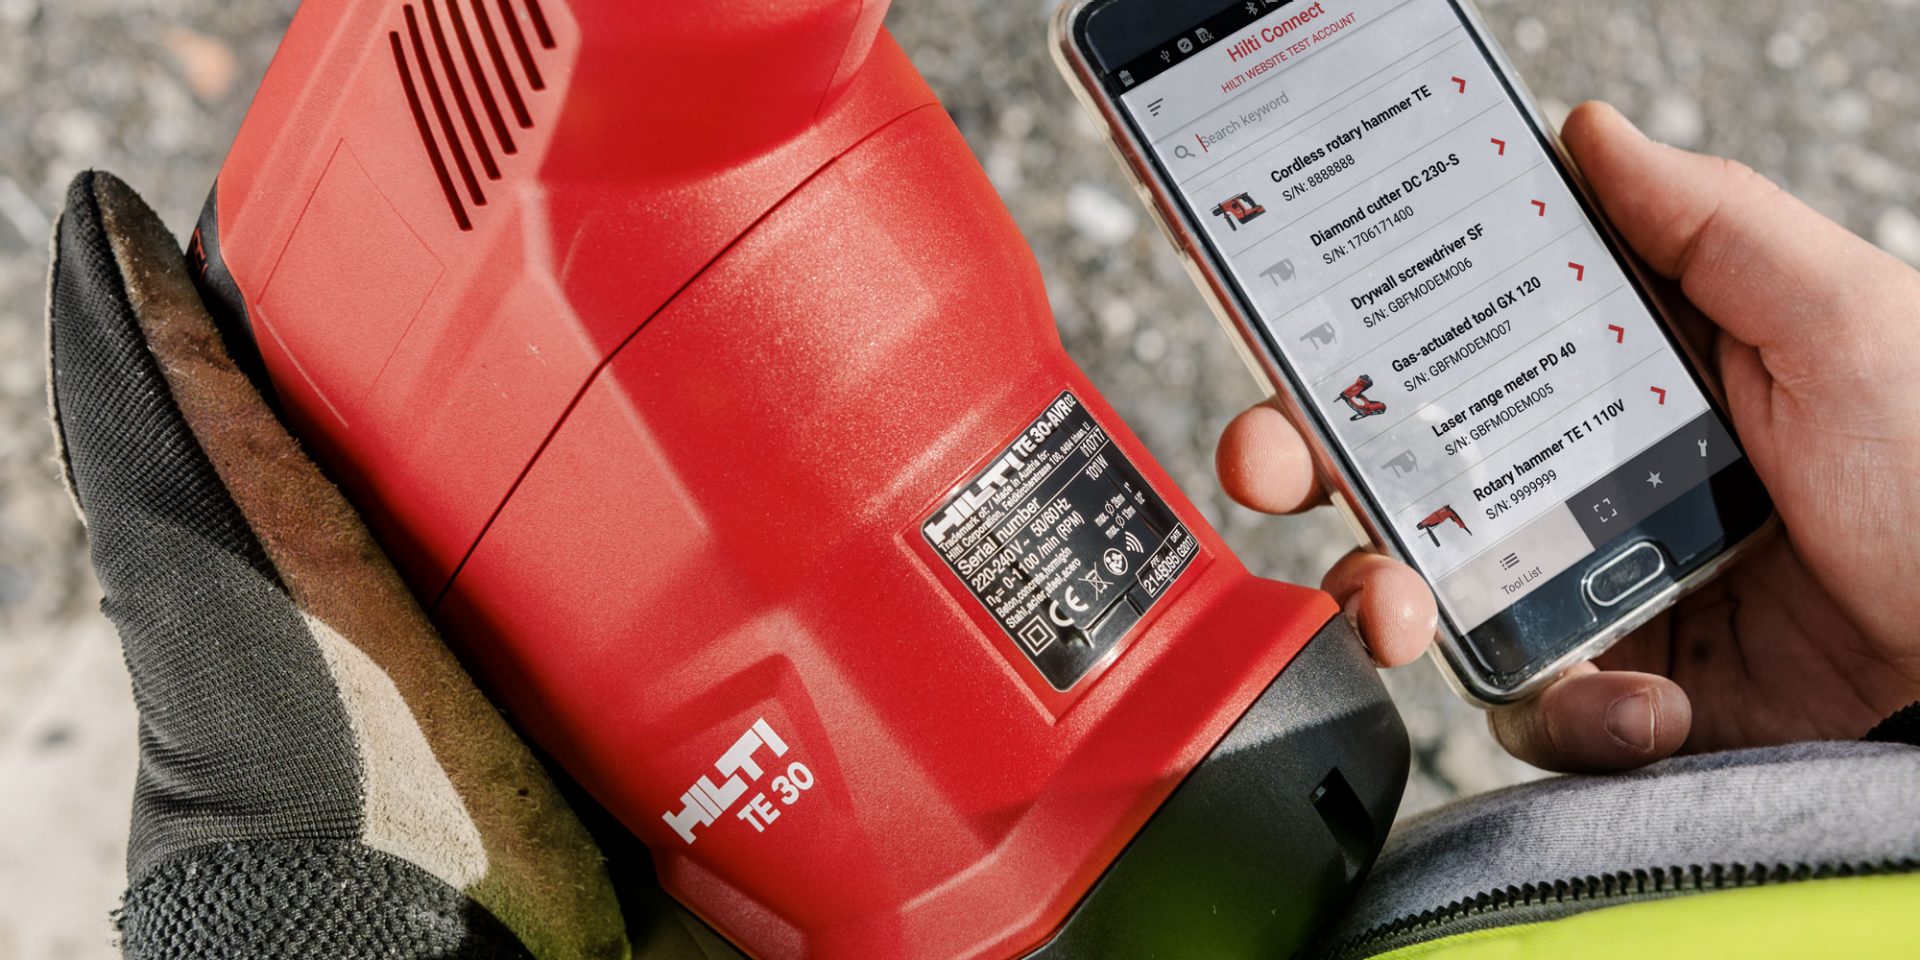 a contractor scans his tool with the Hilti Connect app